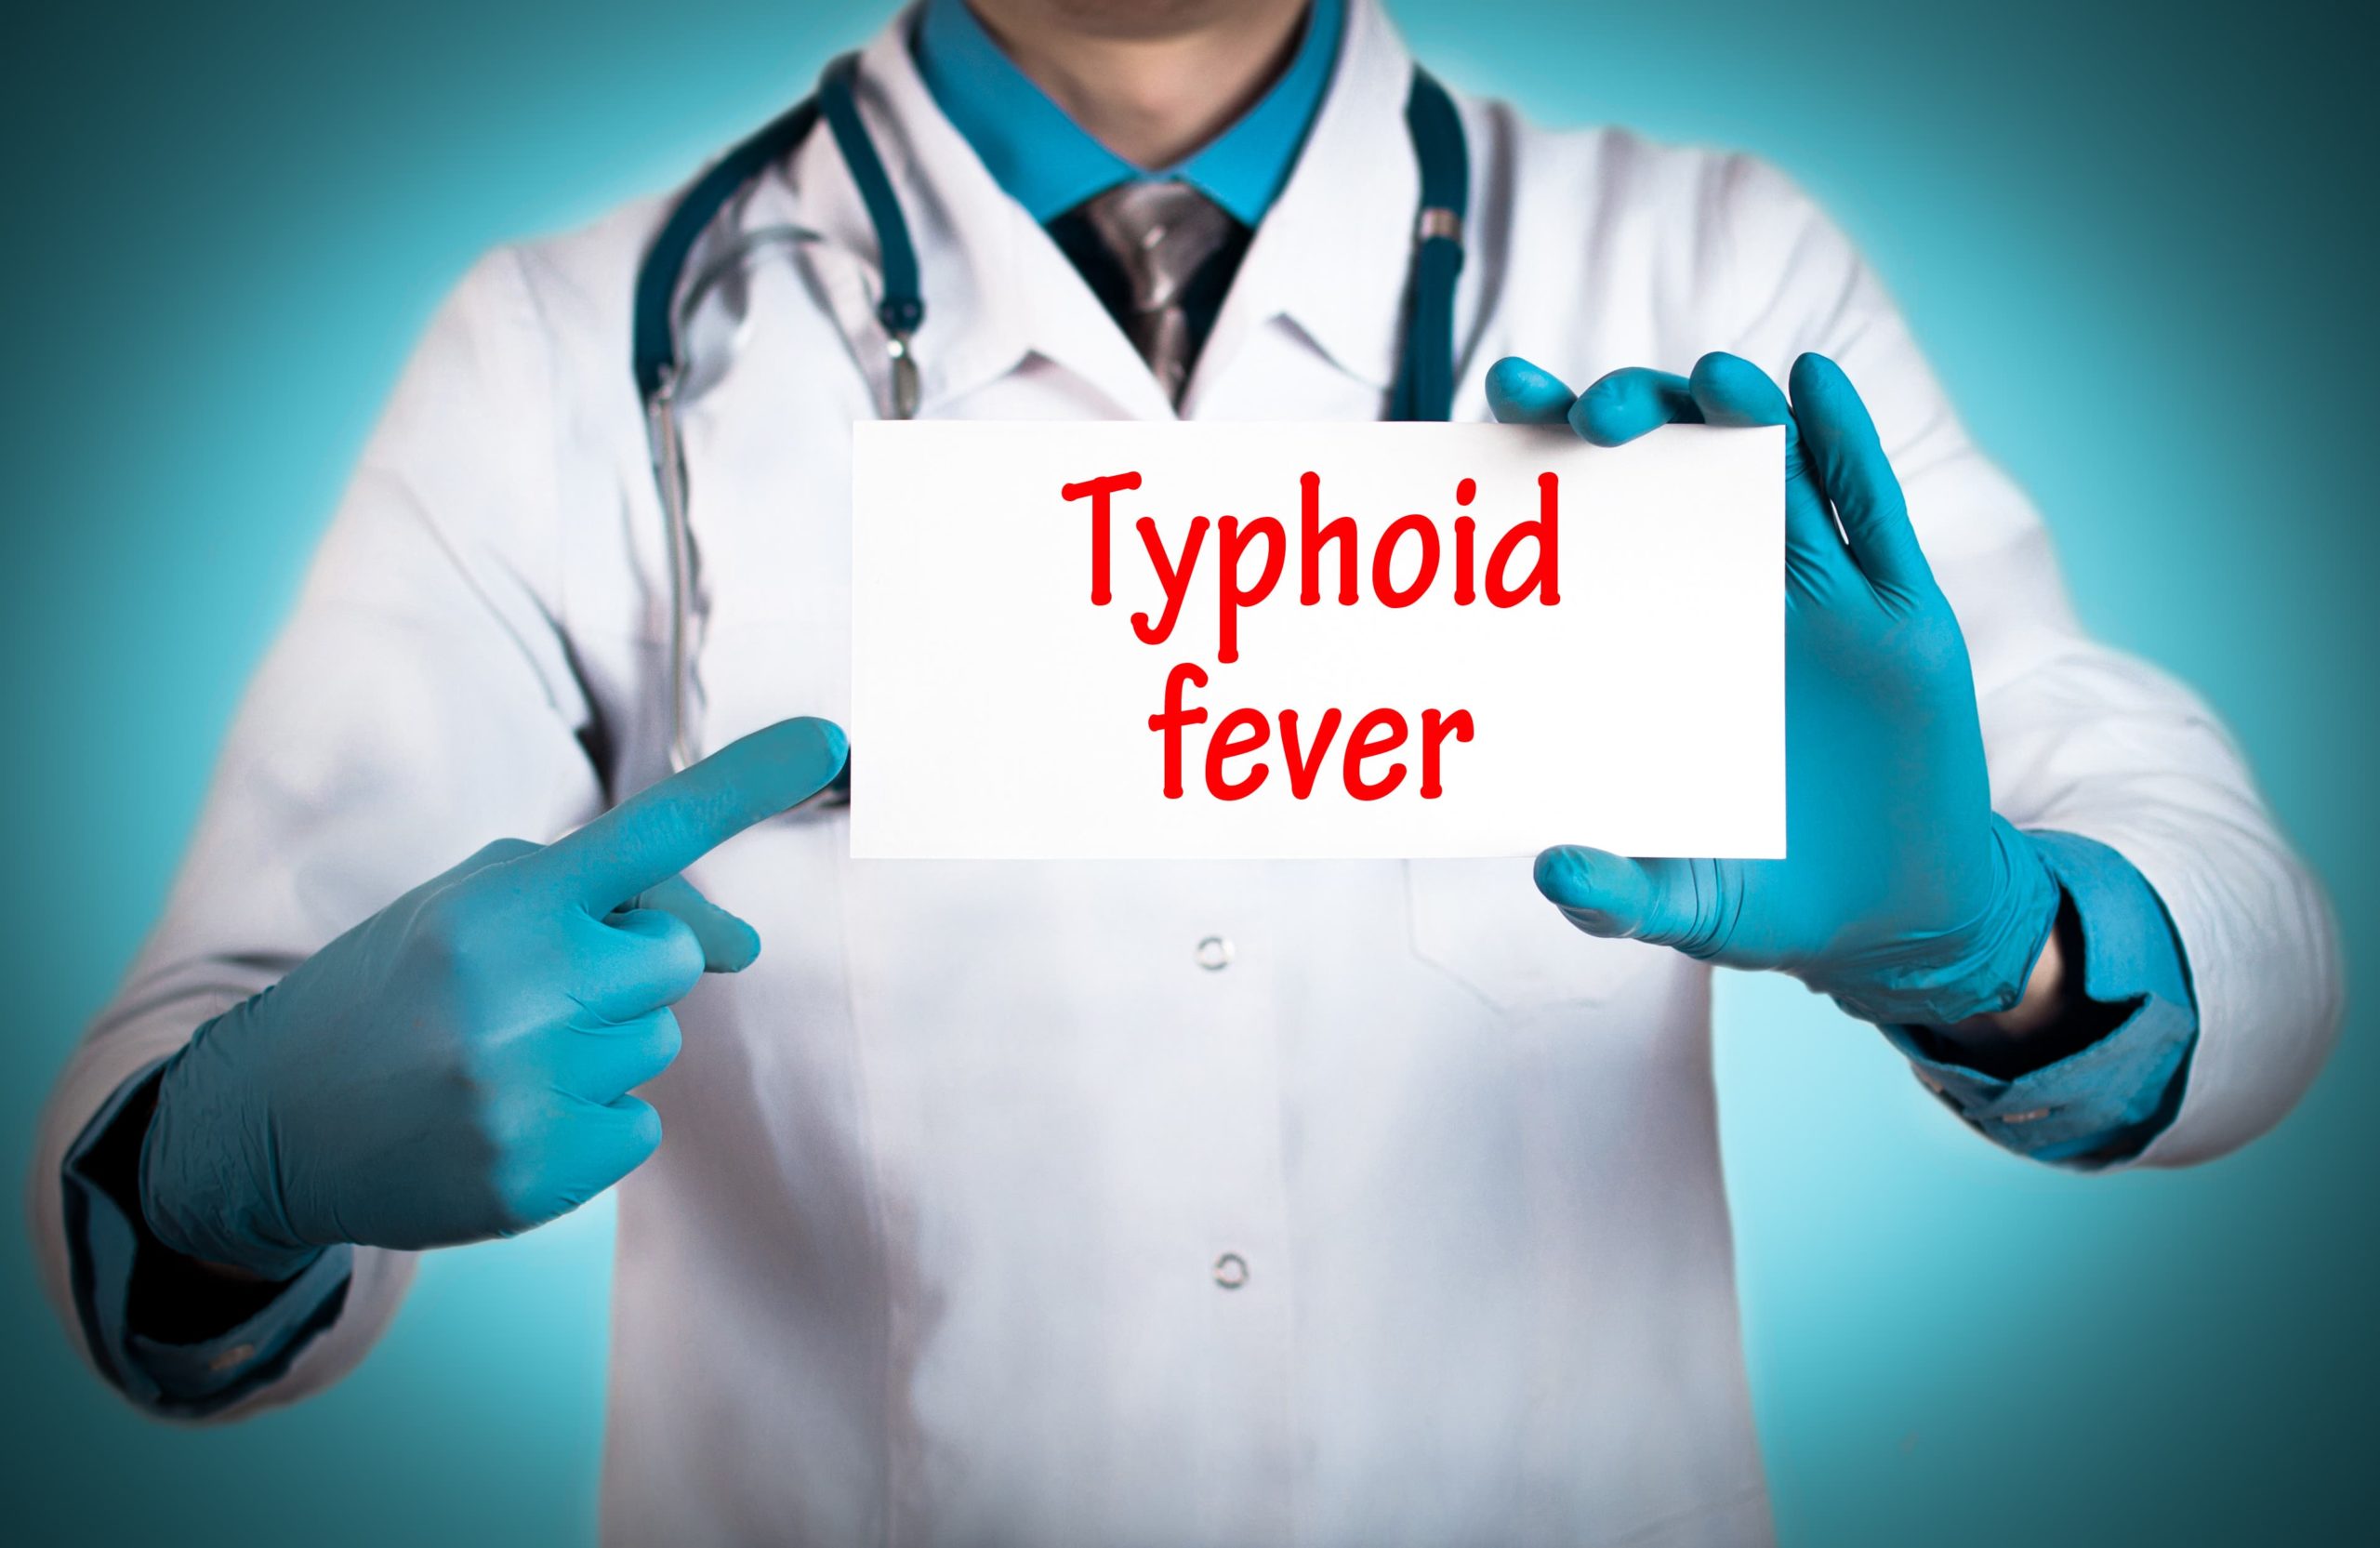 Typhoid Fever: A Very Serious Disease